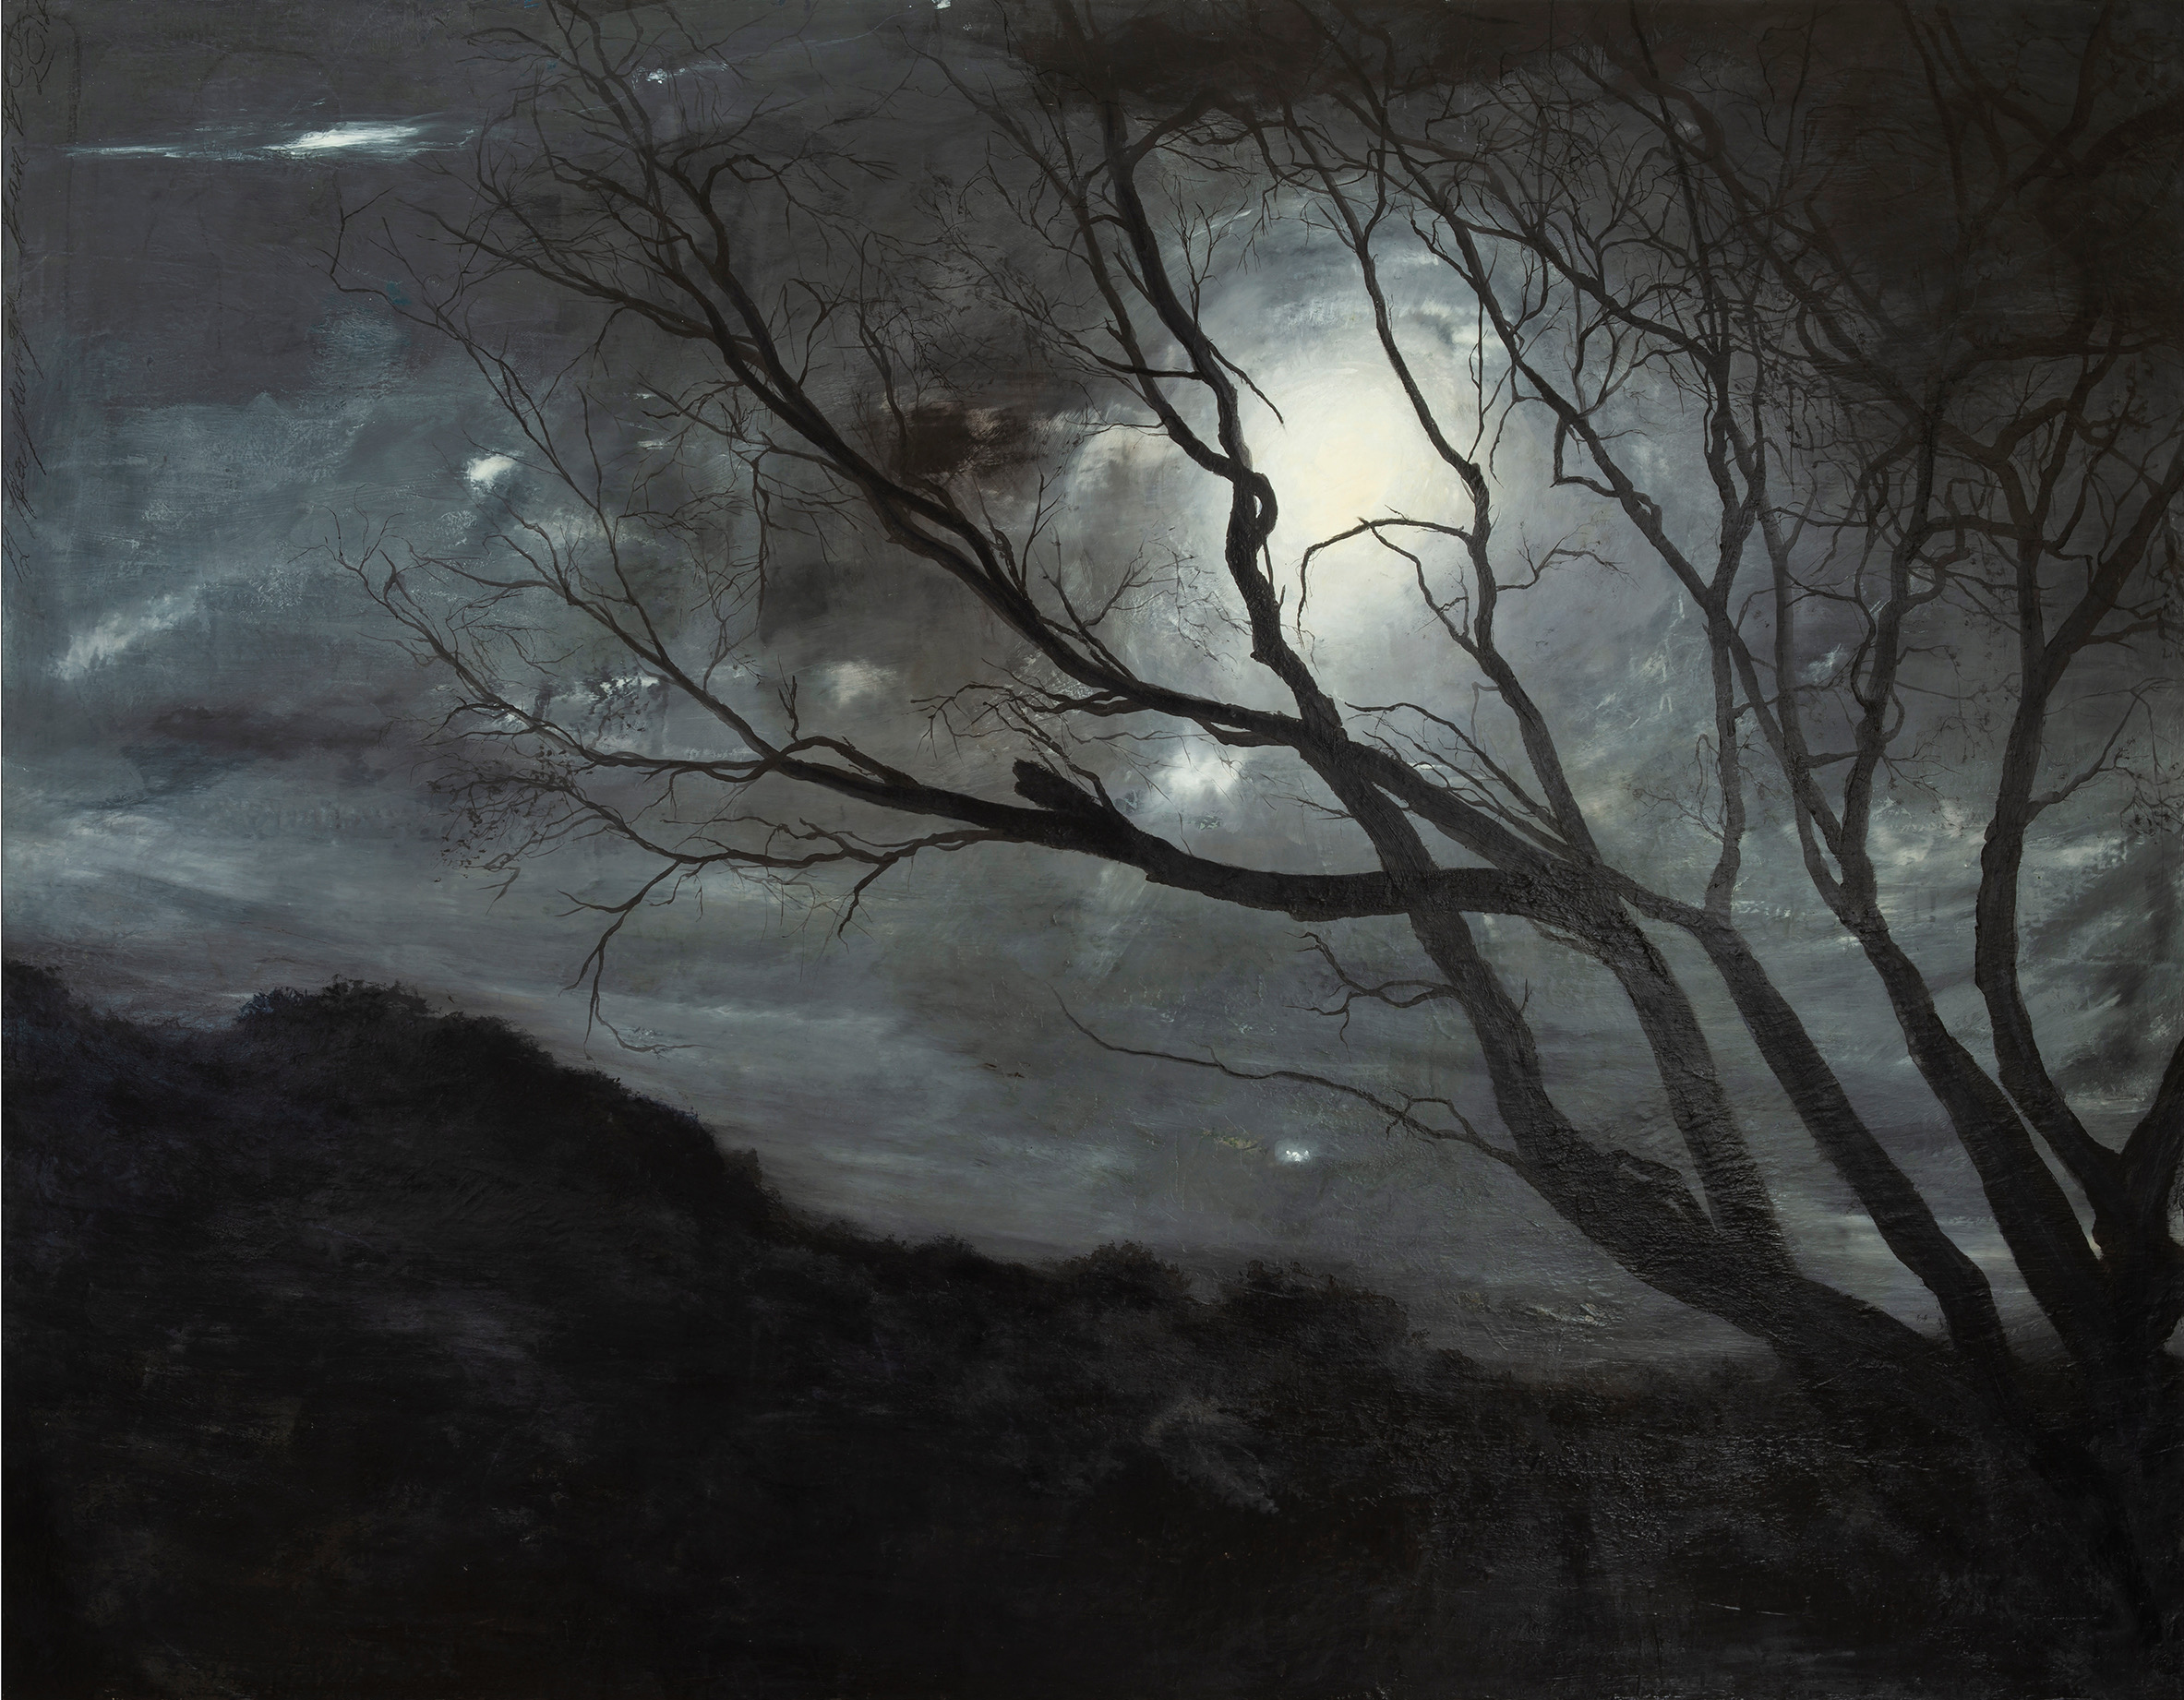 A painting of the moon and trees in the dark.